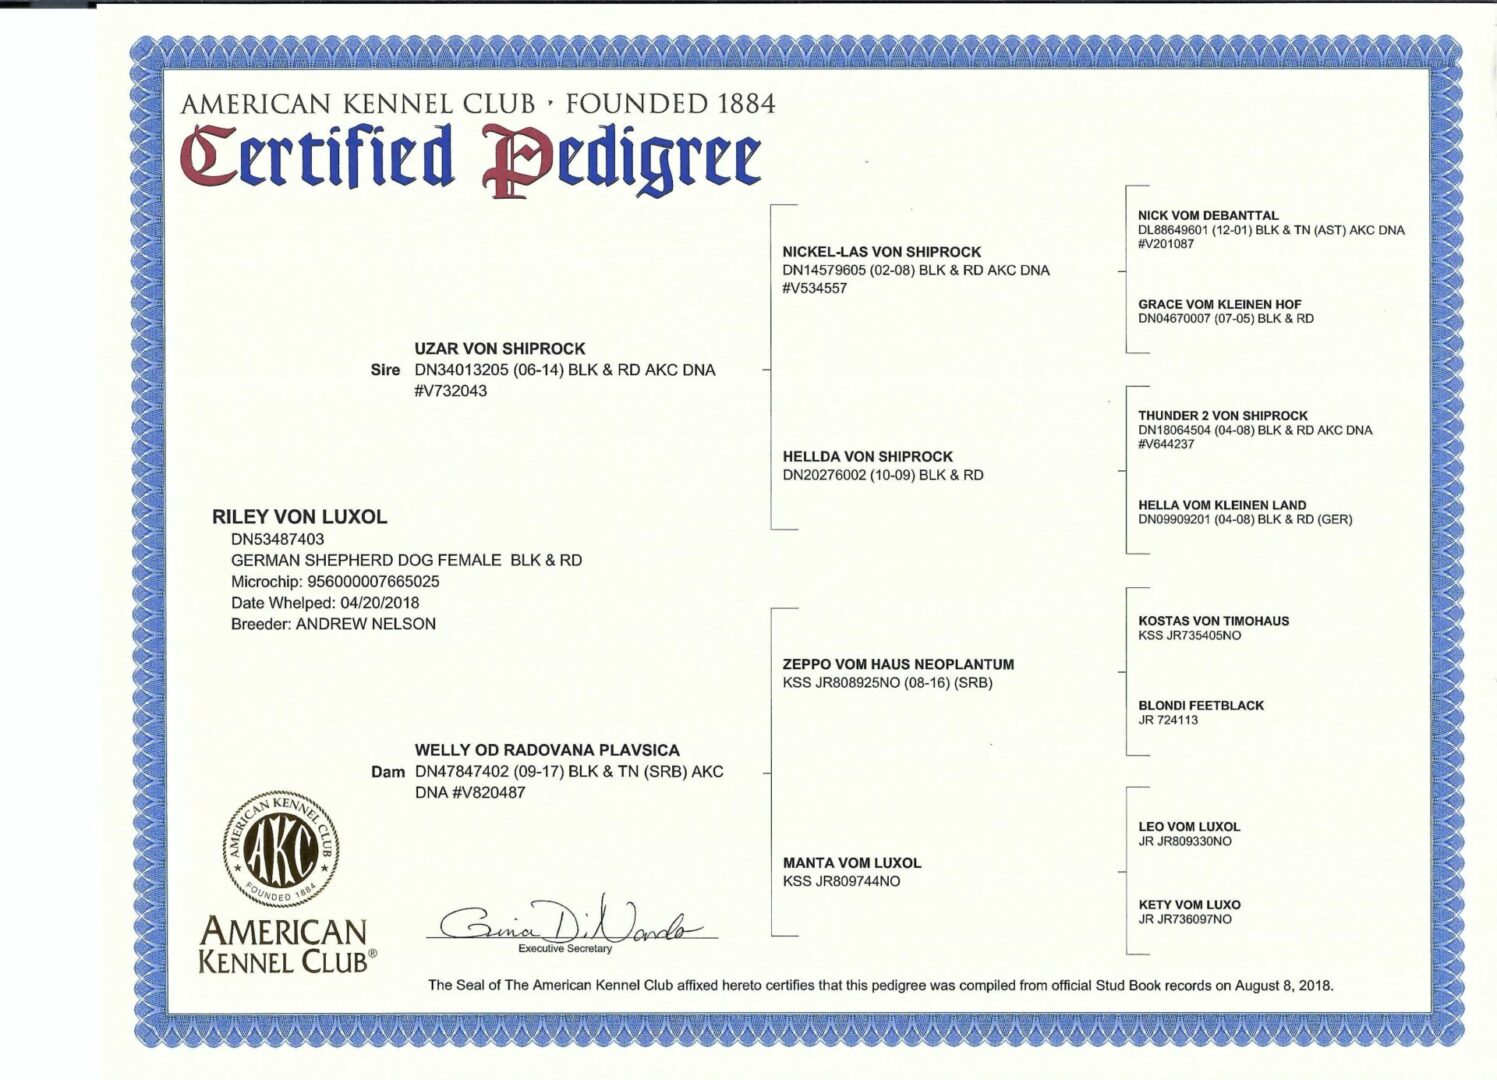 A certificate of birth for an american kennel club dog.